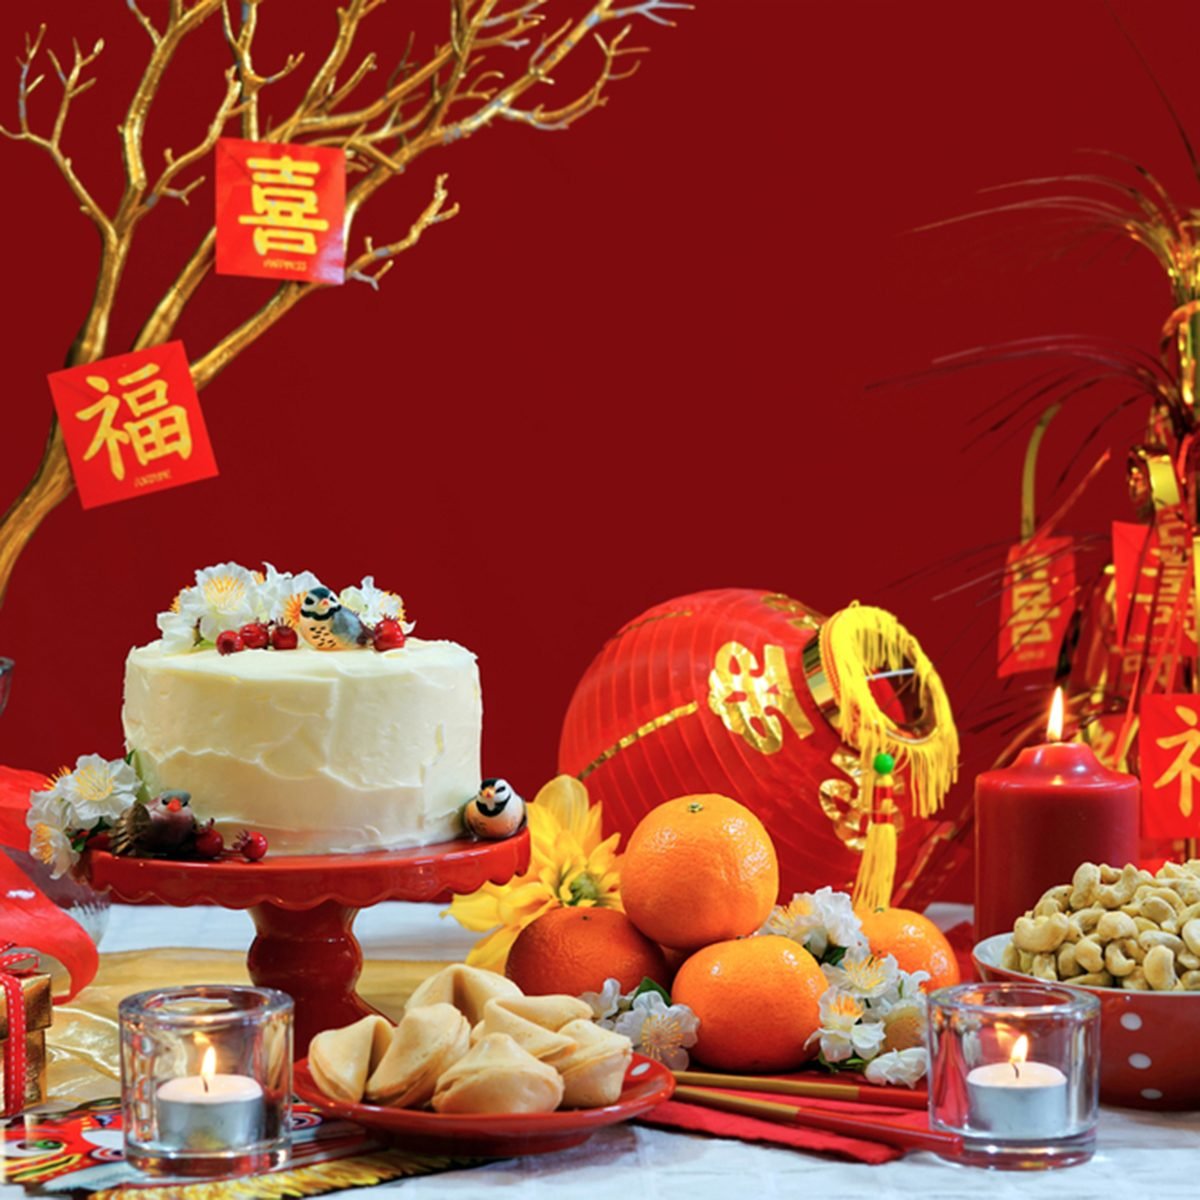 How to Decorate for Chinese New Year